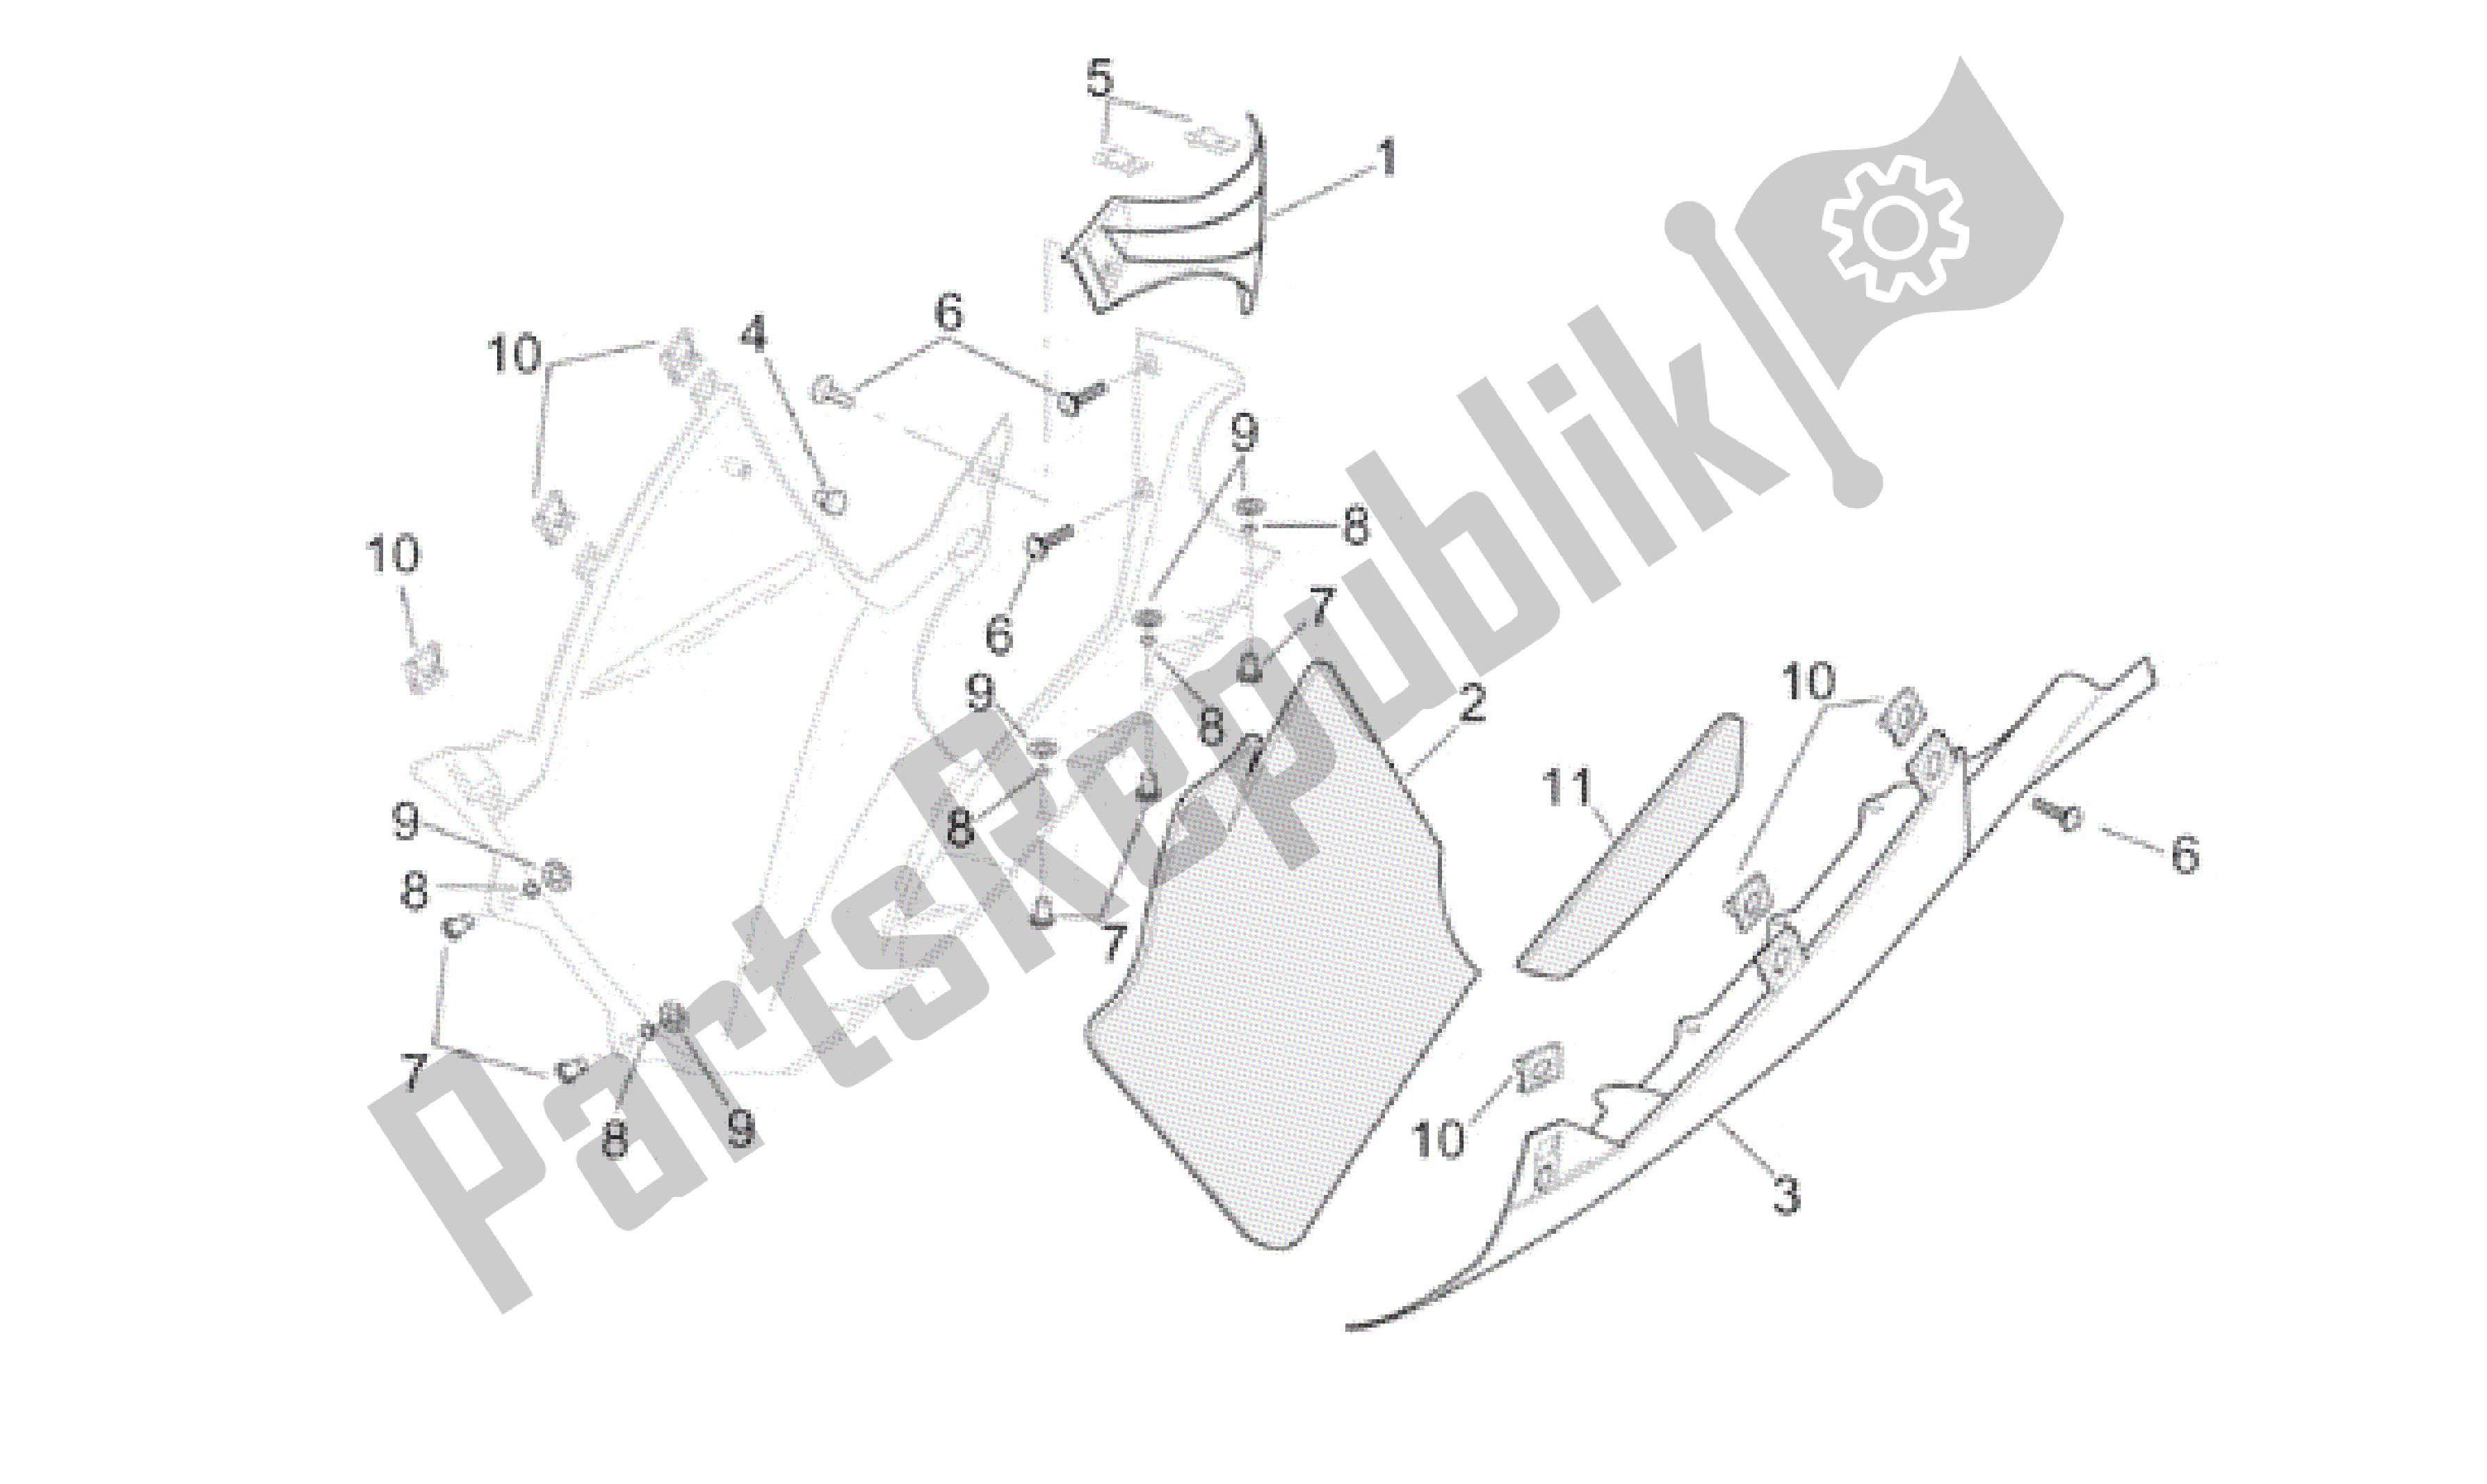 All parts for the Central Body - Lh Fairings of the Aprilia RSV Mille 3901 1000 2001 - 2002